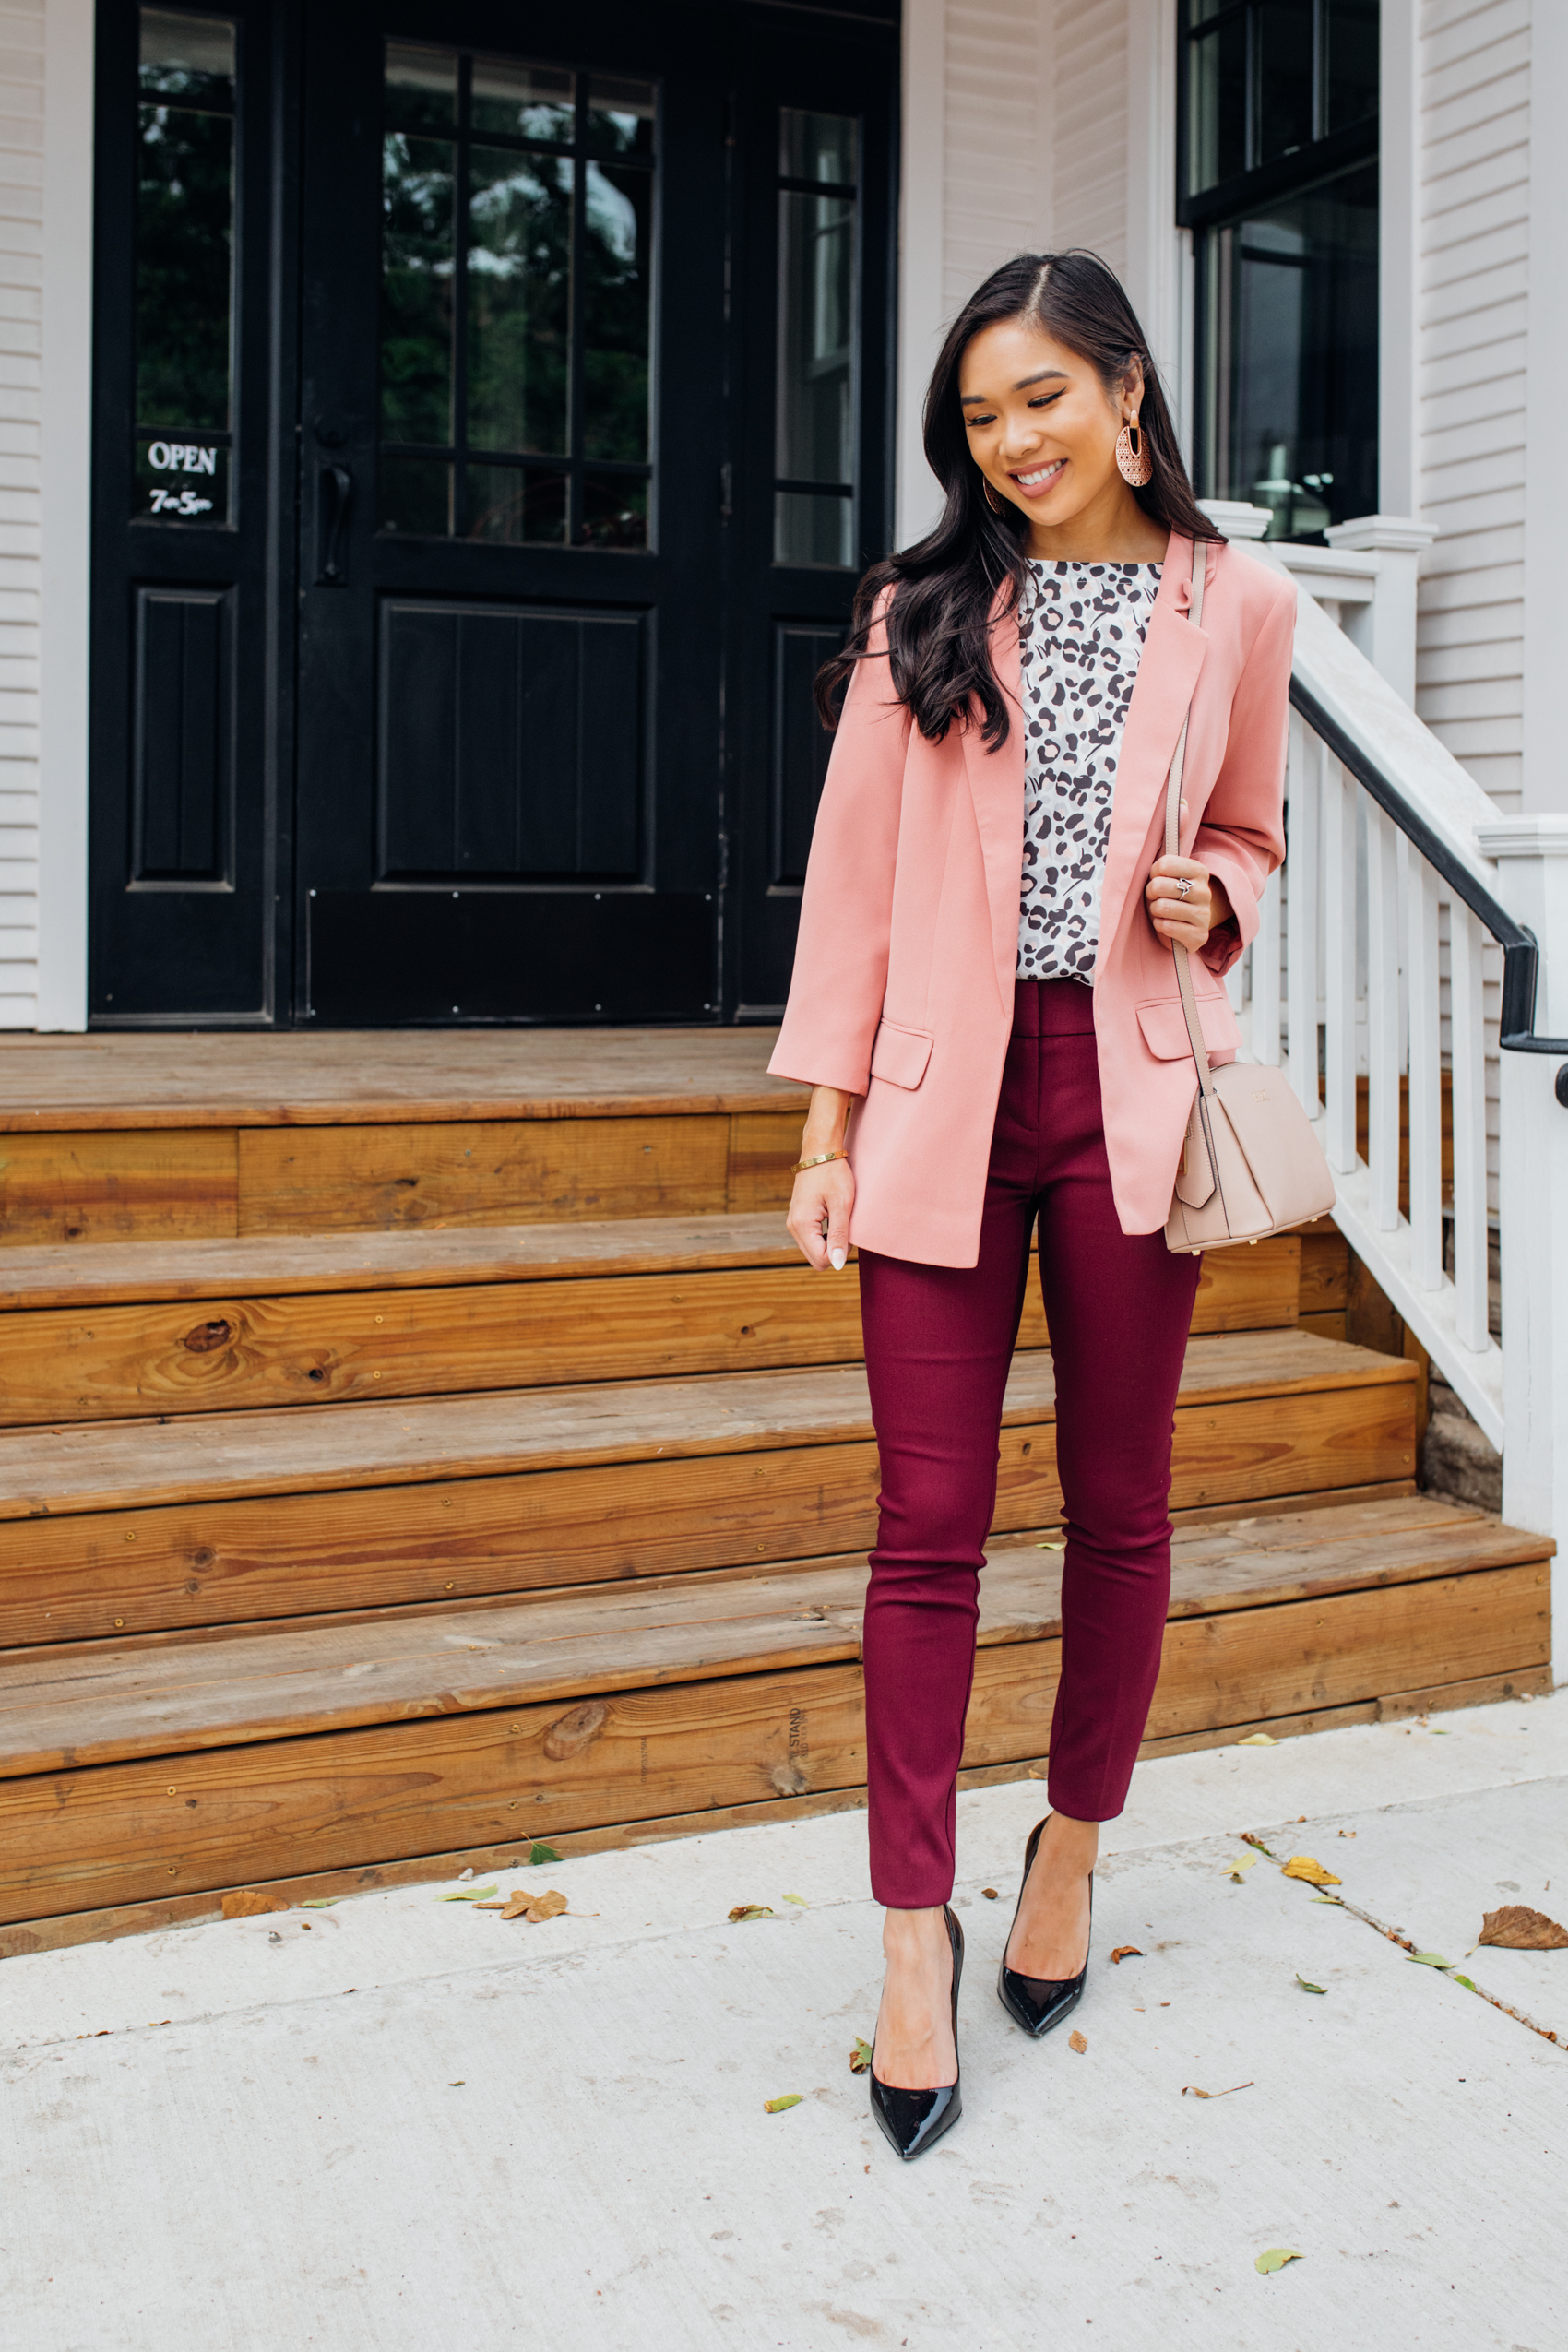 Petite workwear outfit featuring leopard print, burgundy pants and pink blazer